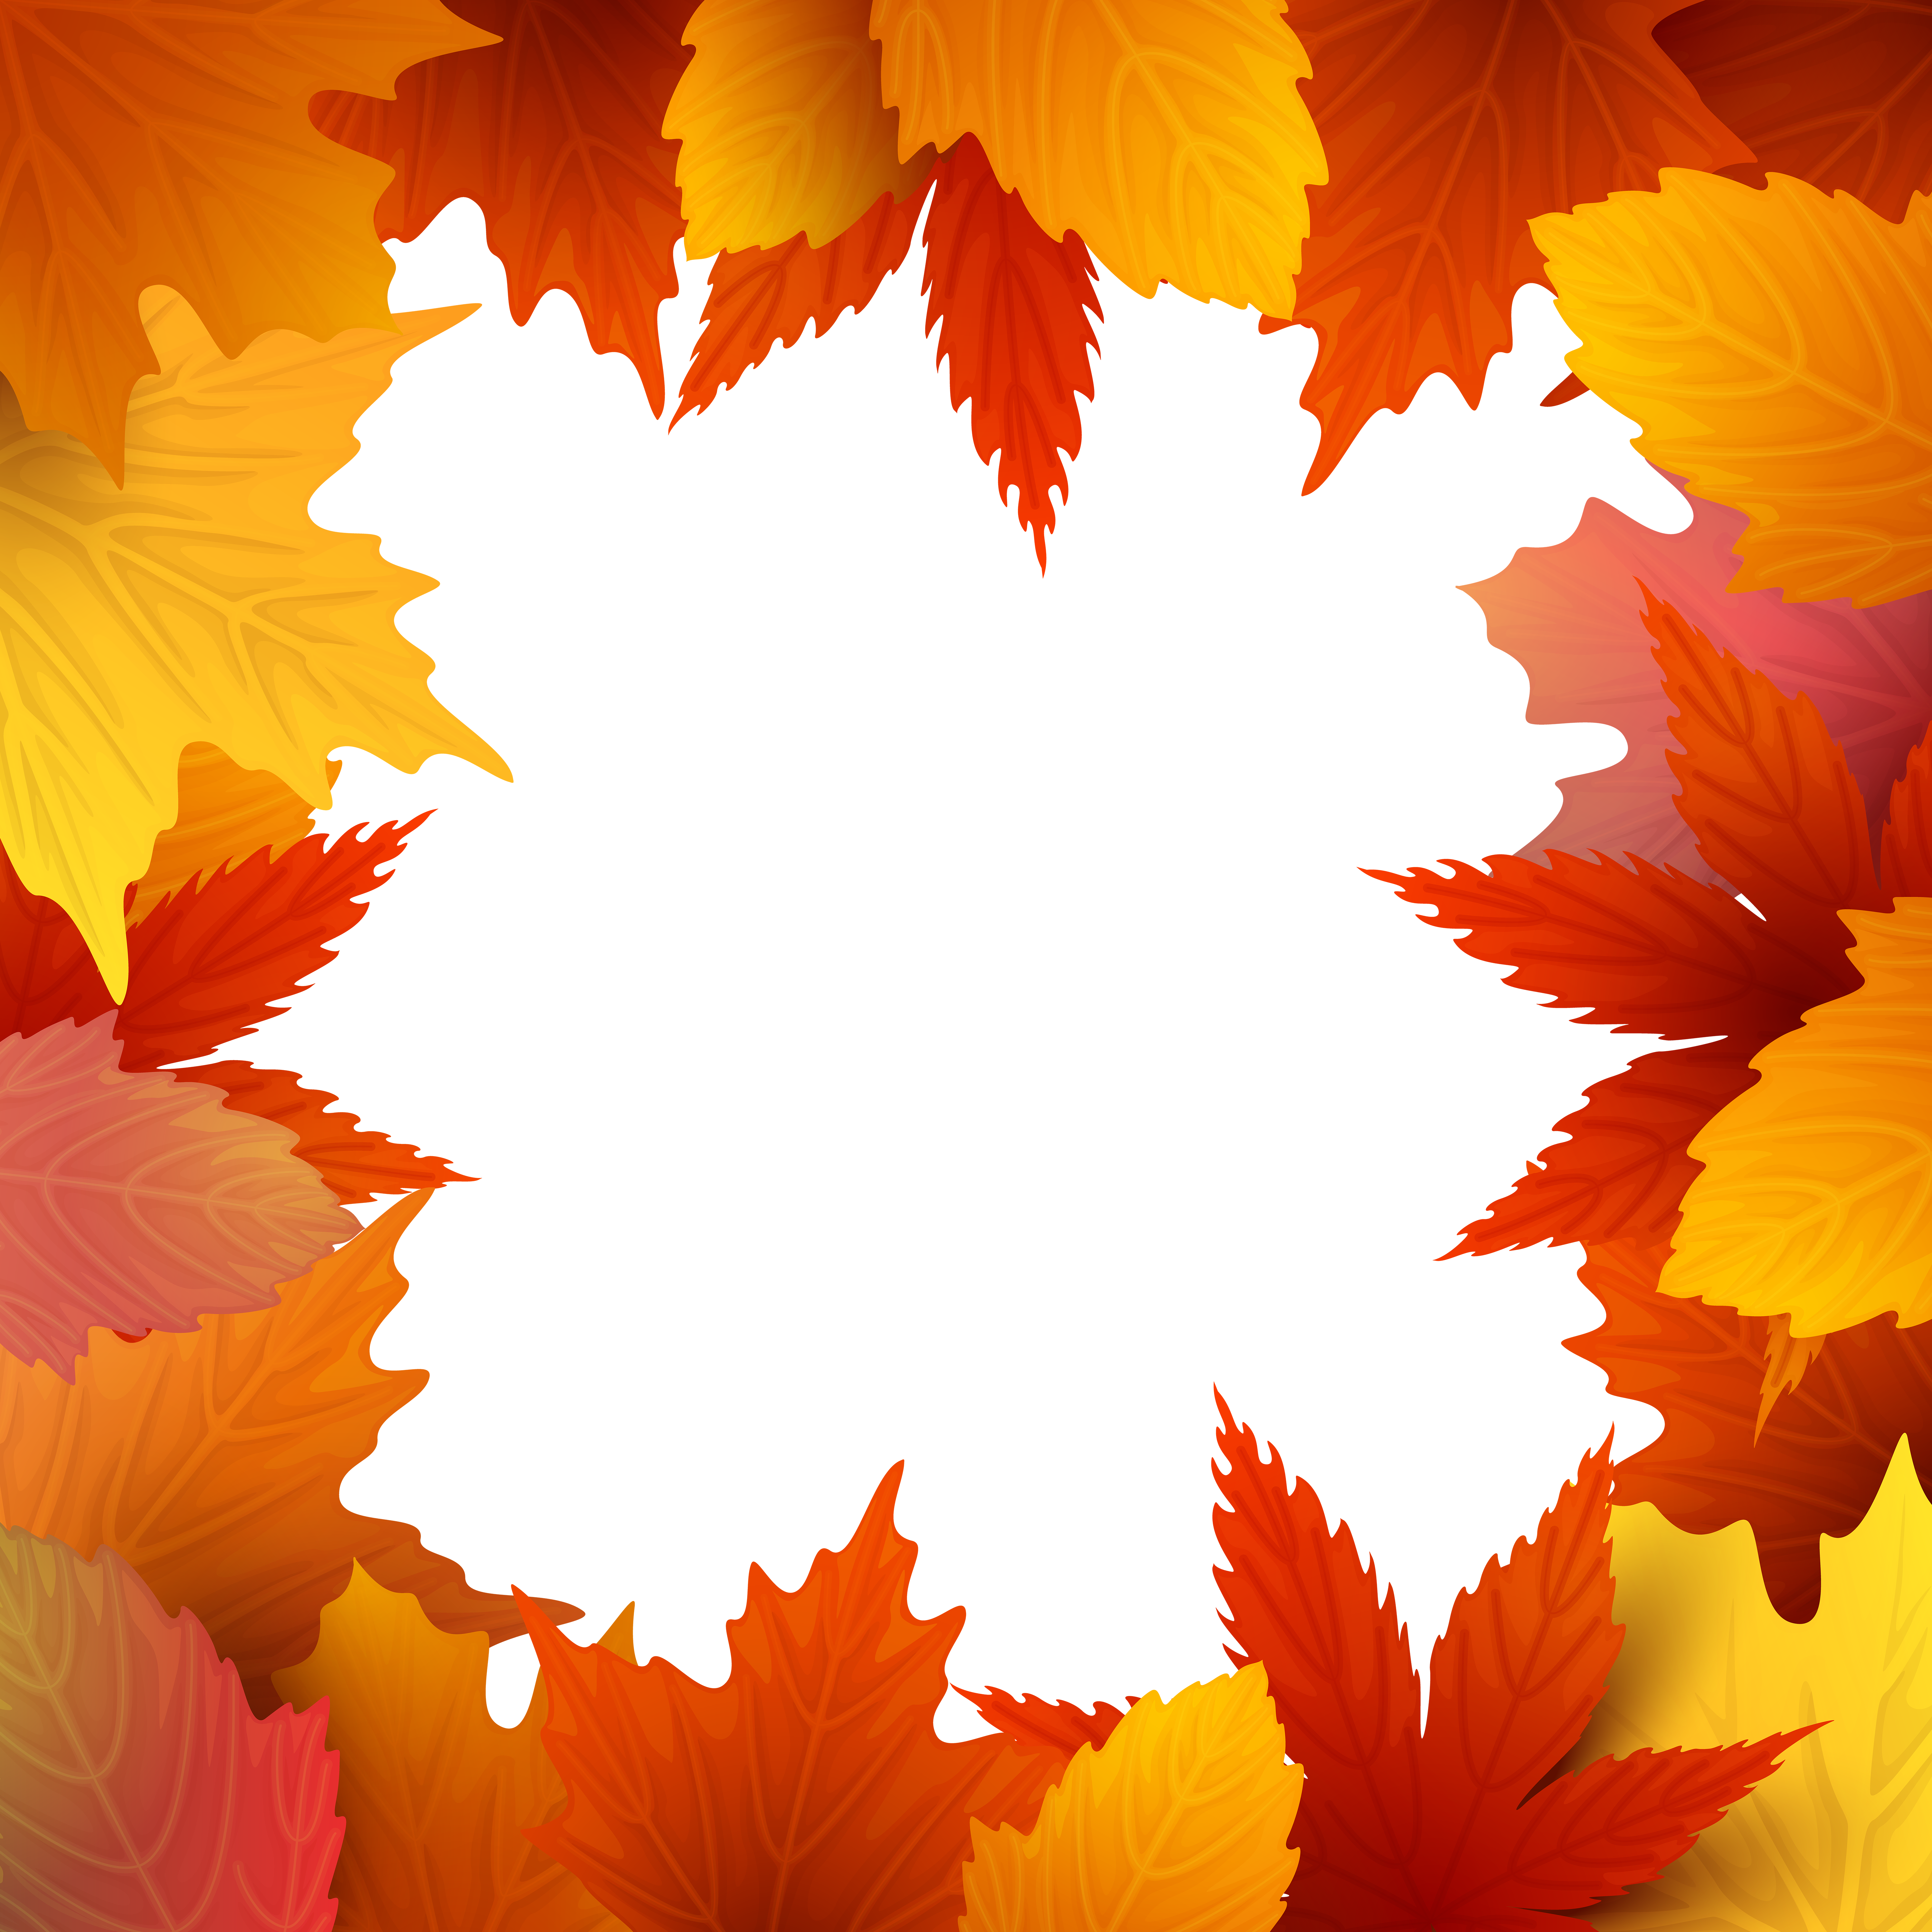 Autumn Leaves Frame Border PNG Clip Art​-Quality Image and Transparent PNG Free Clipart